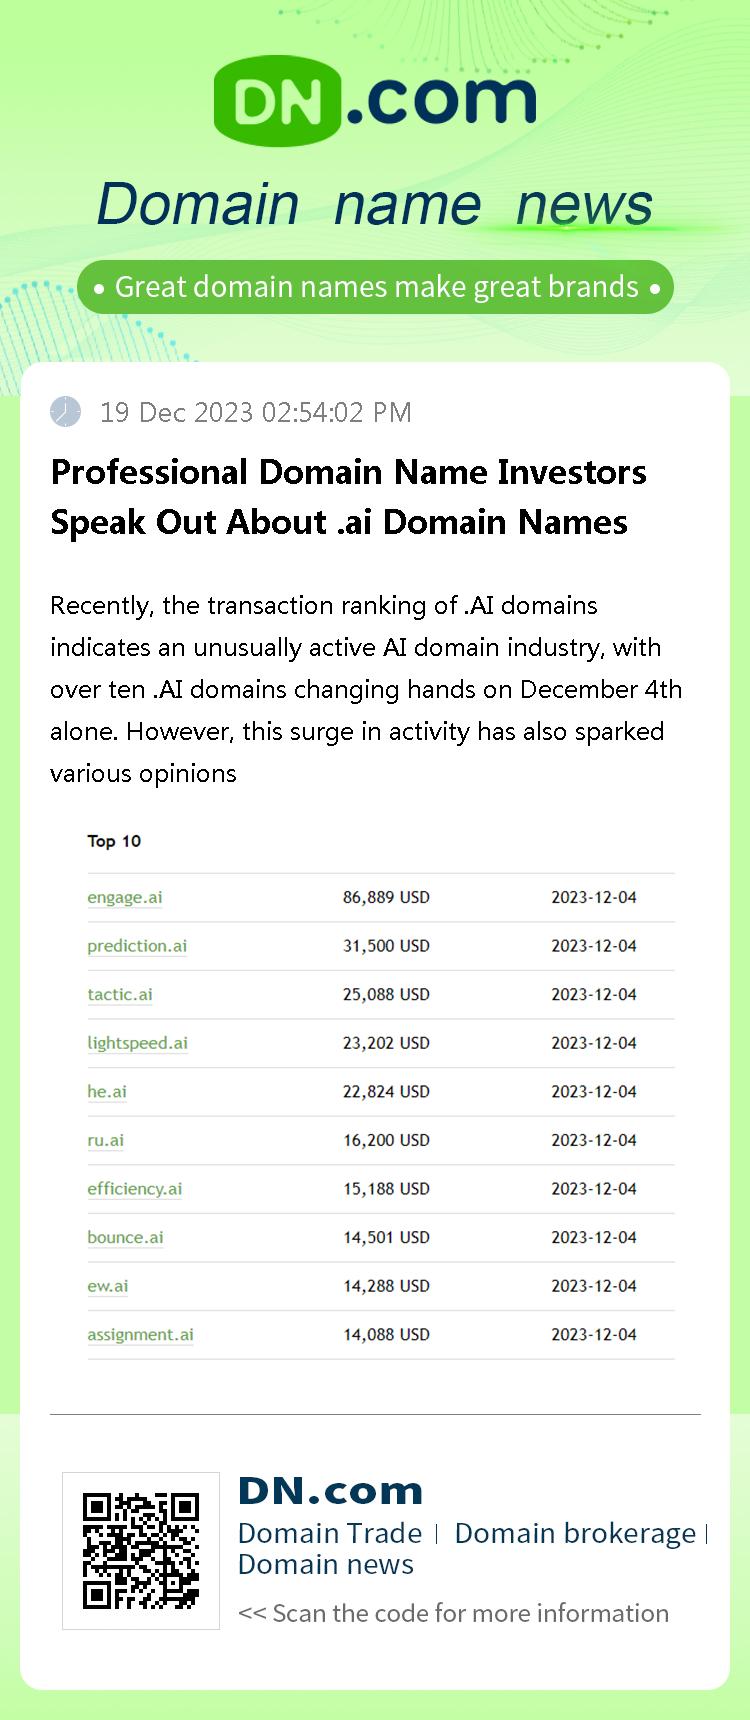 Professional Domain Name Investors Speak Out About .ai Domain Names